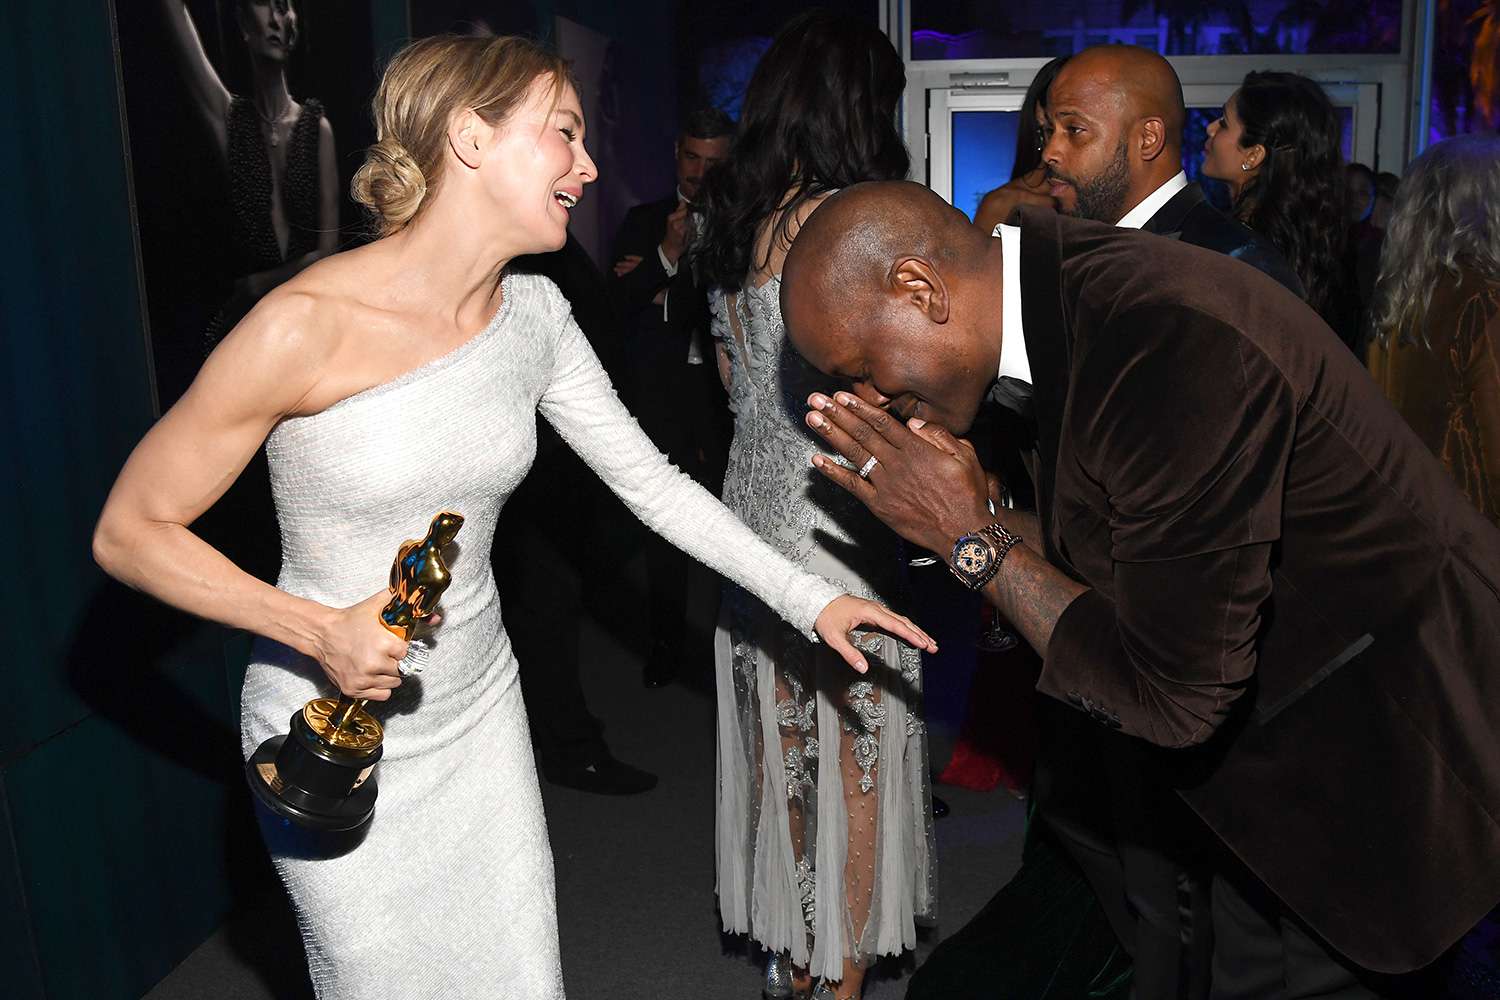 Renee Zellweger and Tyrese Gibson attend the 2020 Vanity Fair Oscar Party hosted by Radhika Jones at Wallis Annenberg Center for the Performing Arts on February 09, 2020 in Beverly Hills, California